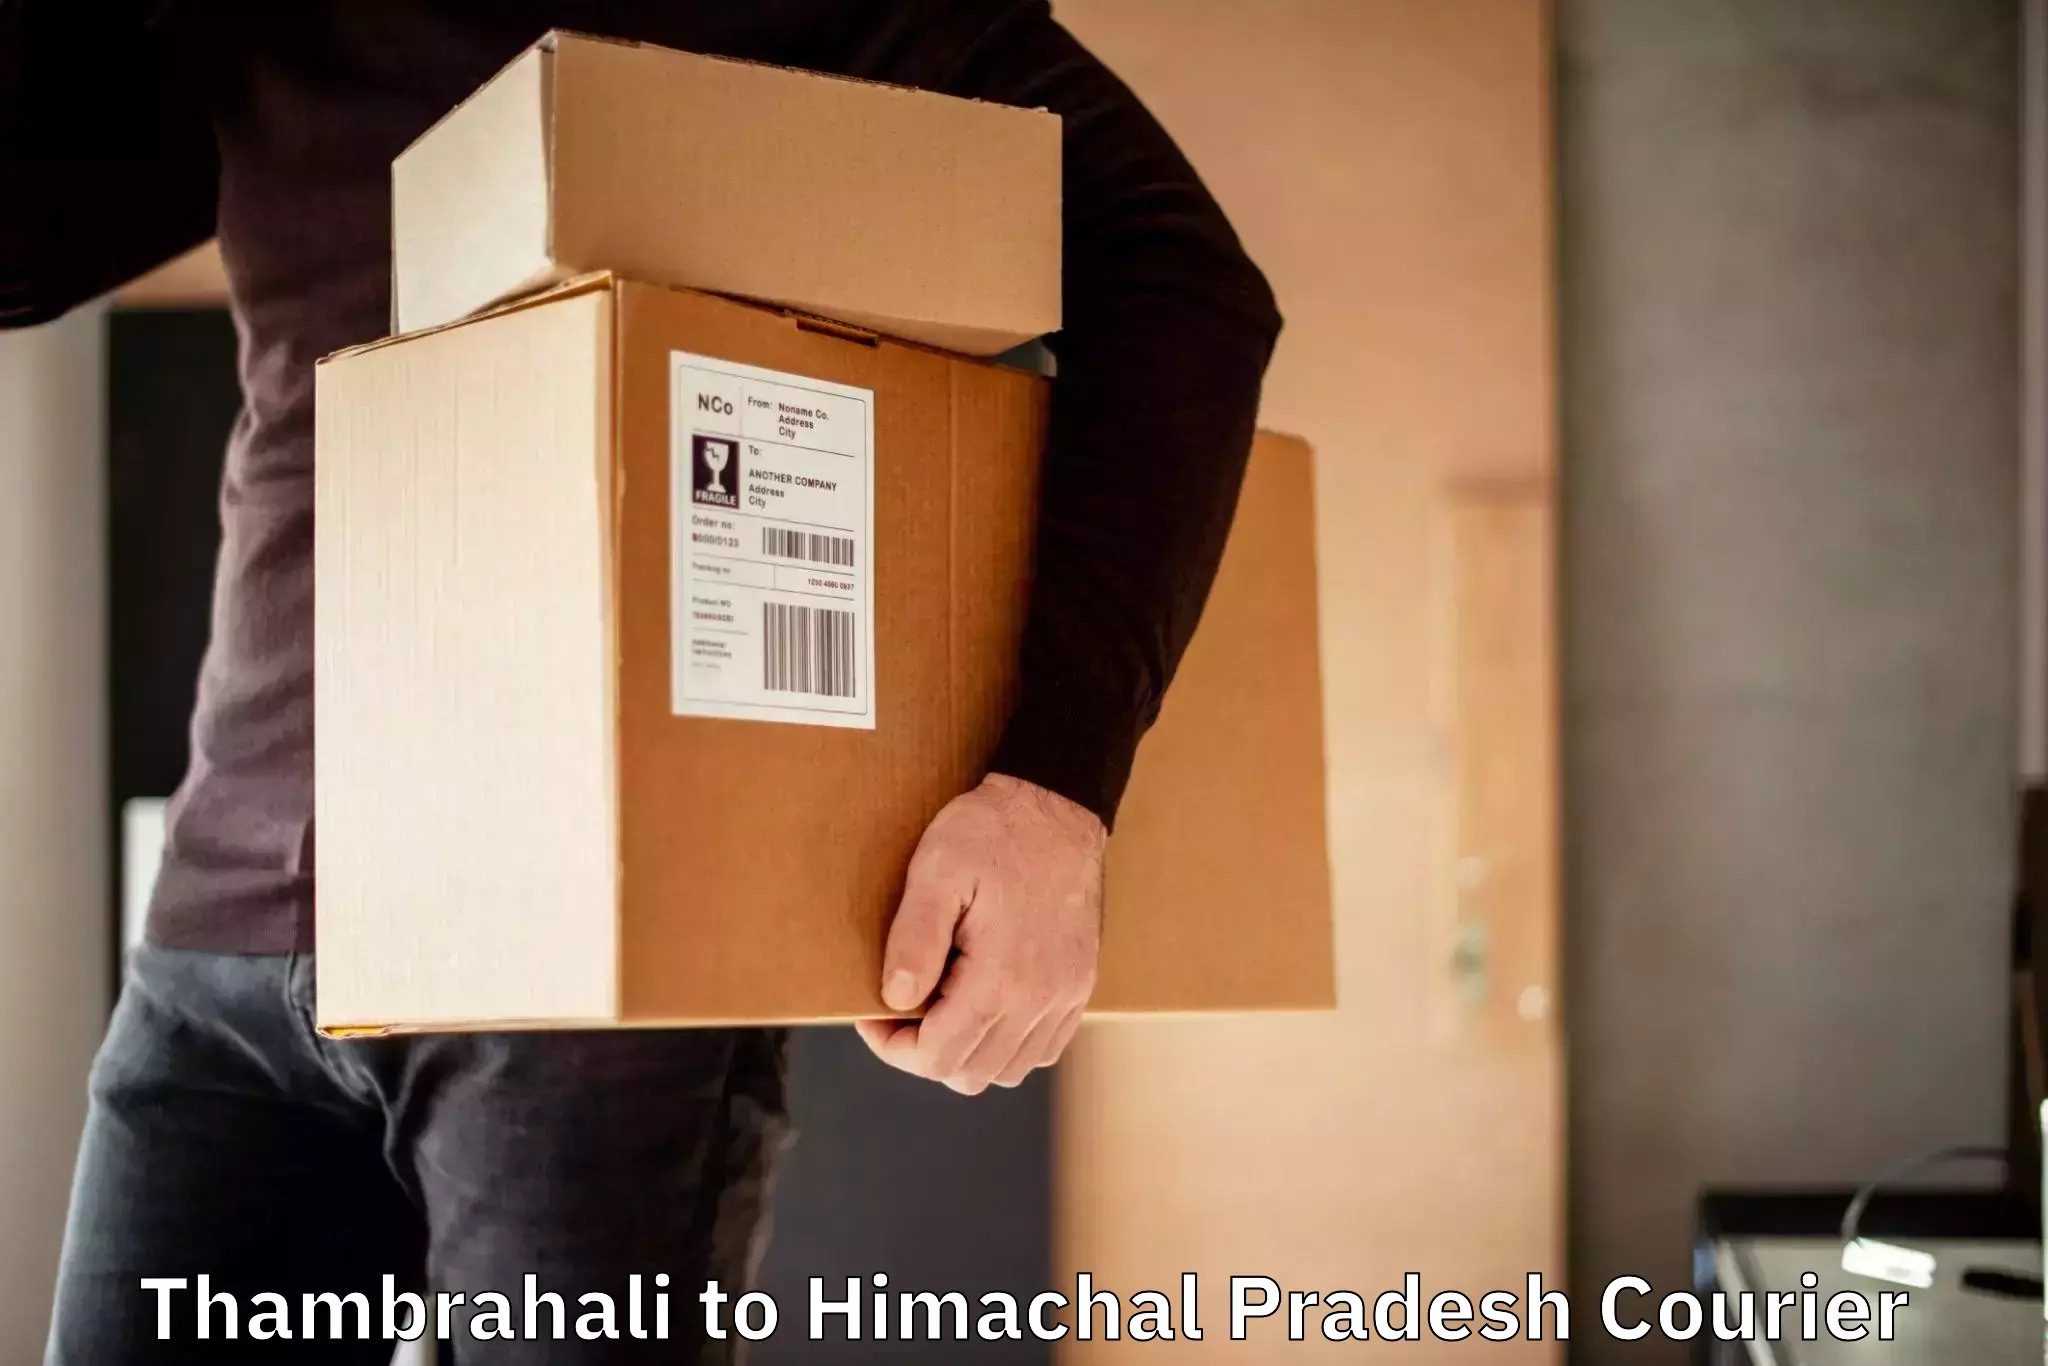 Global courier networks Thambrahali to Una